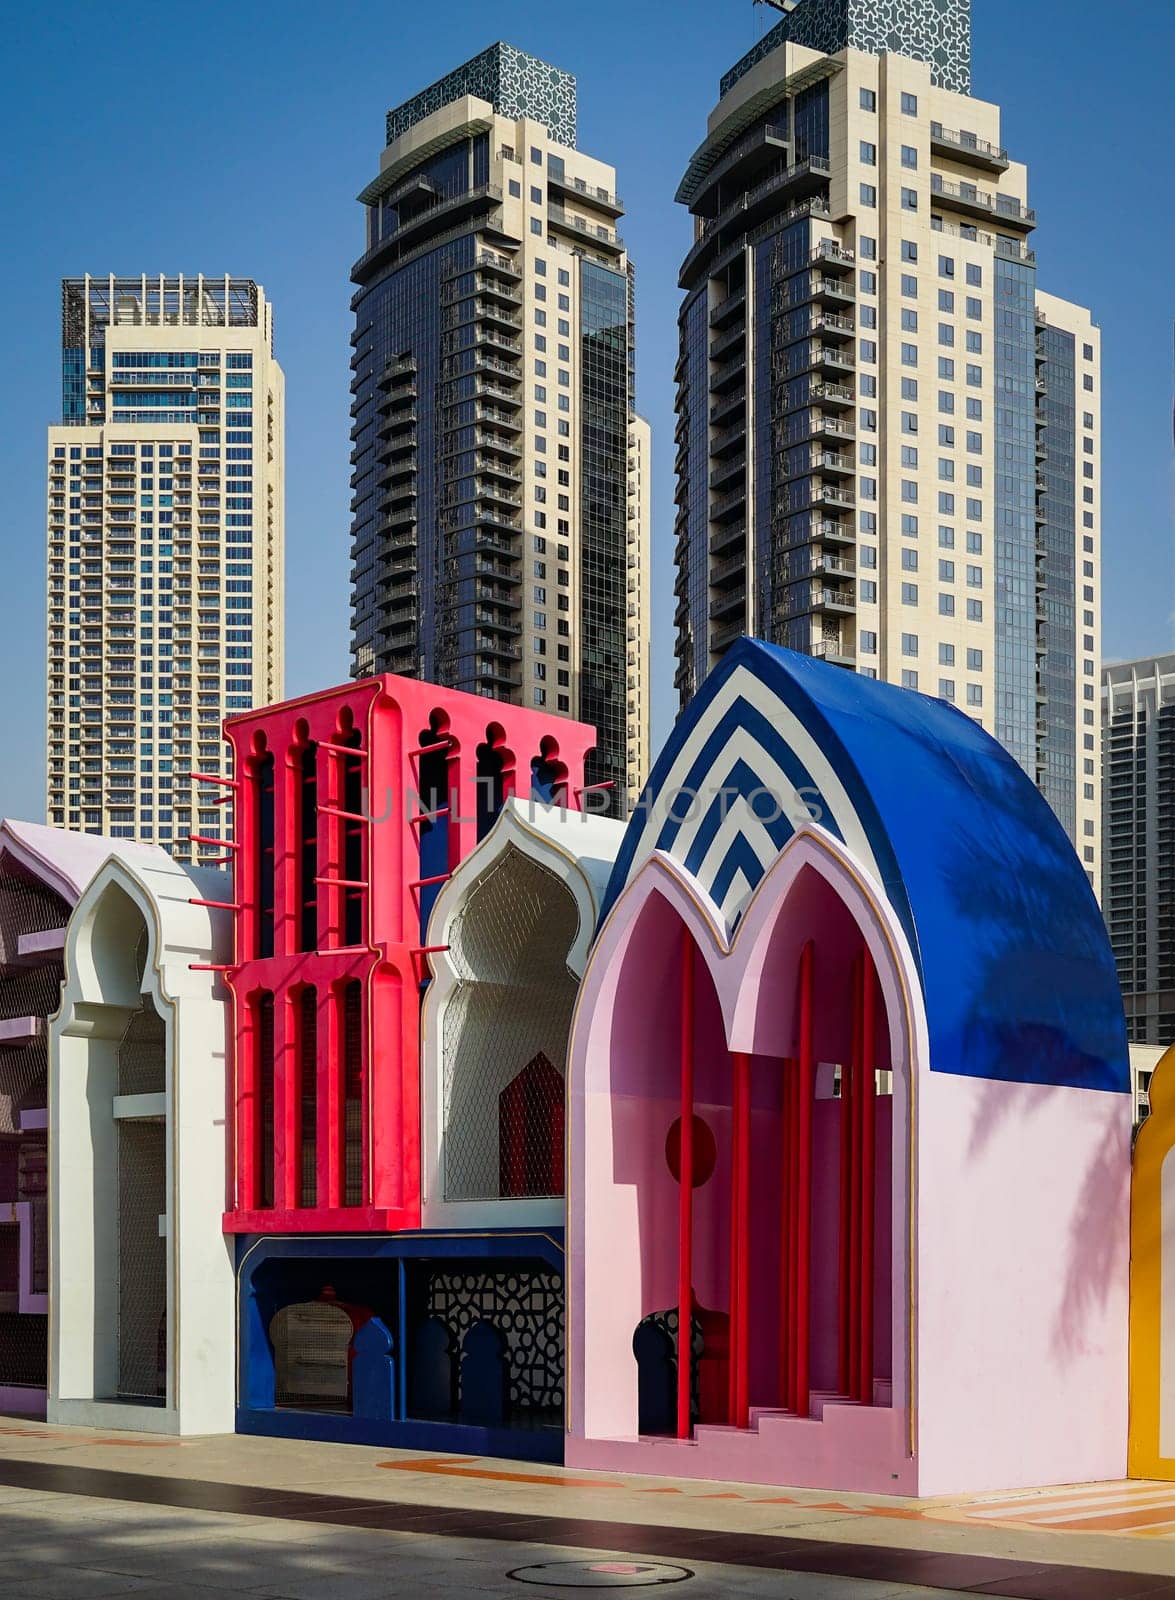 A beautiful and colorful playground depicting the ancient minarets by stan111